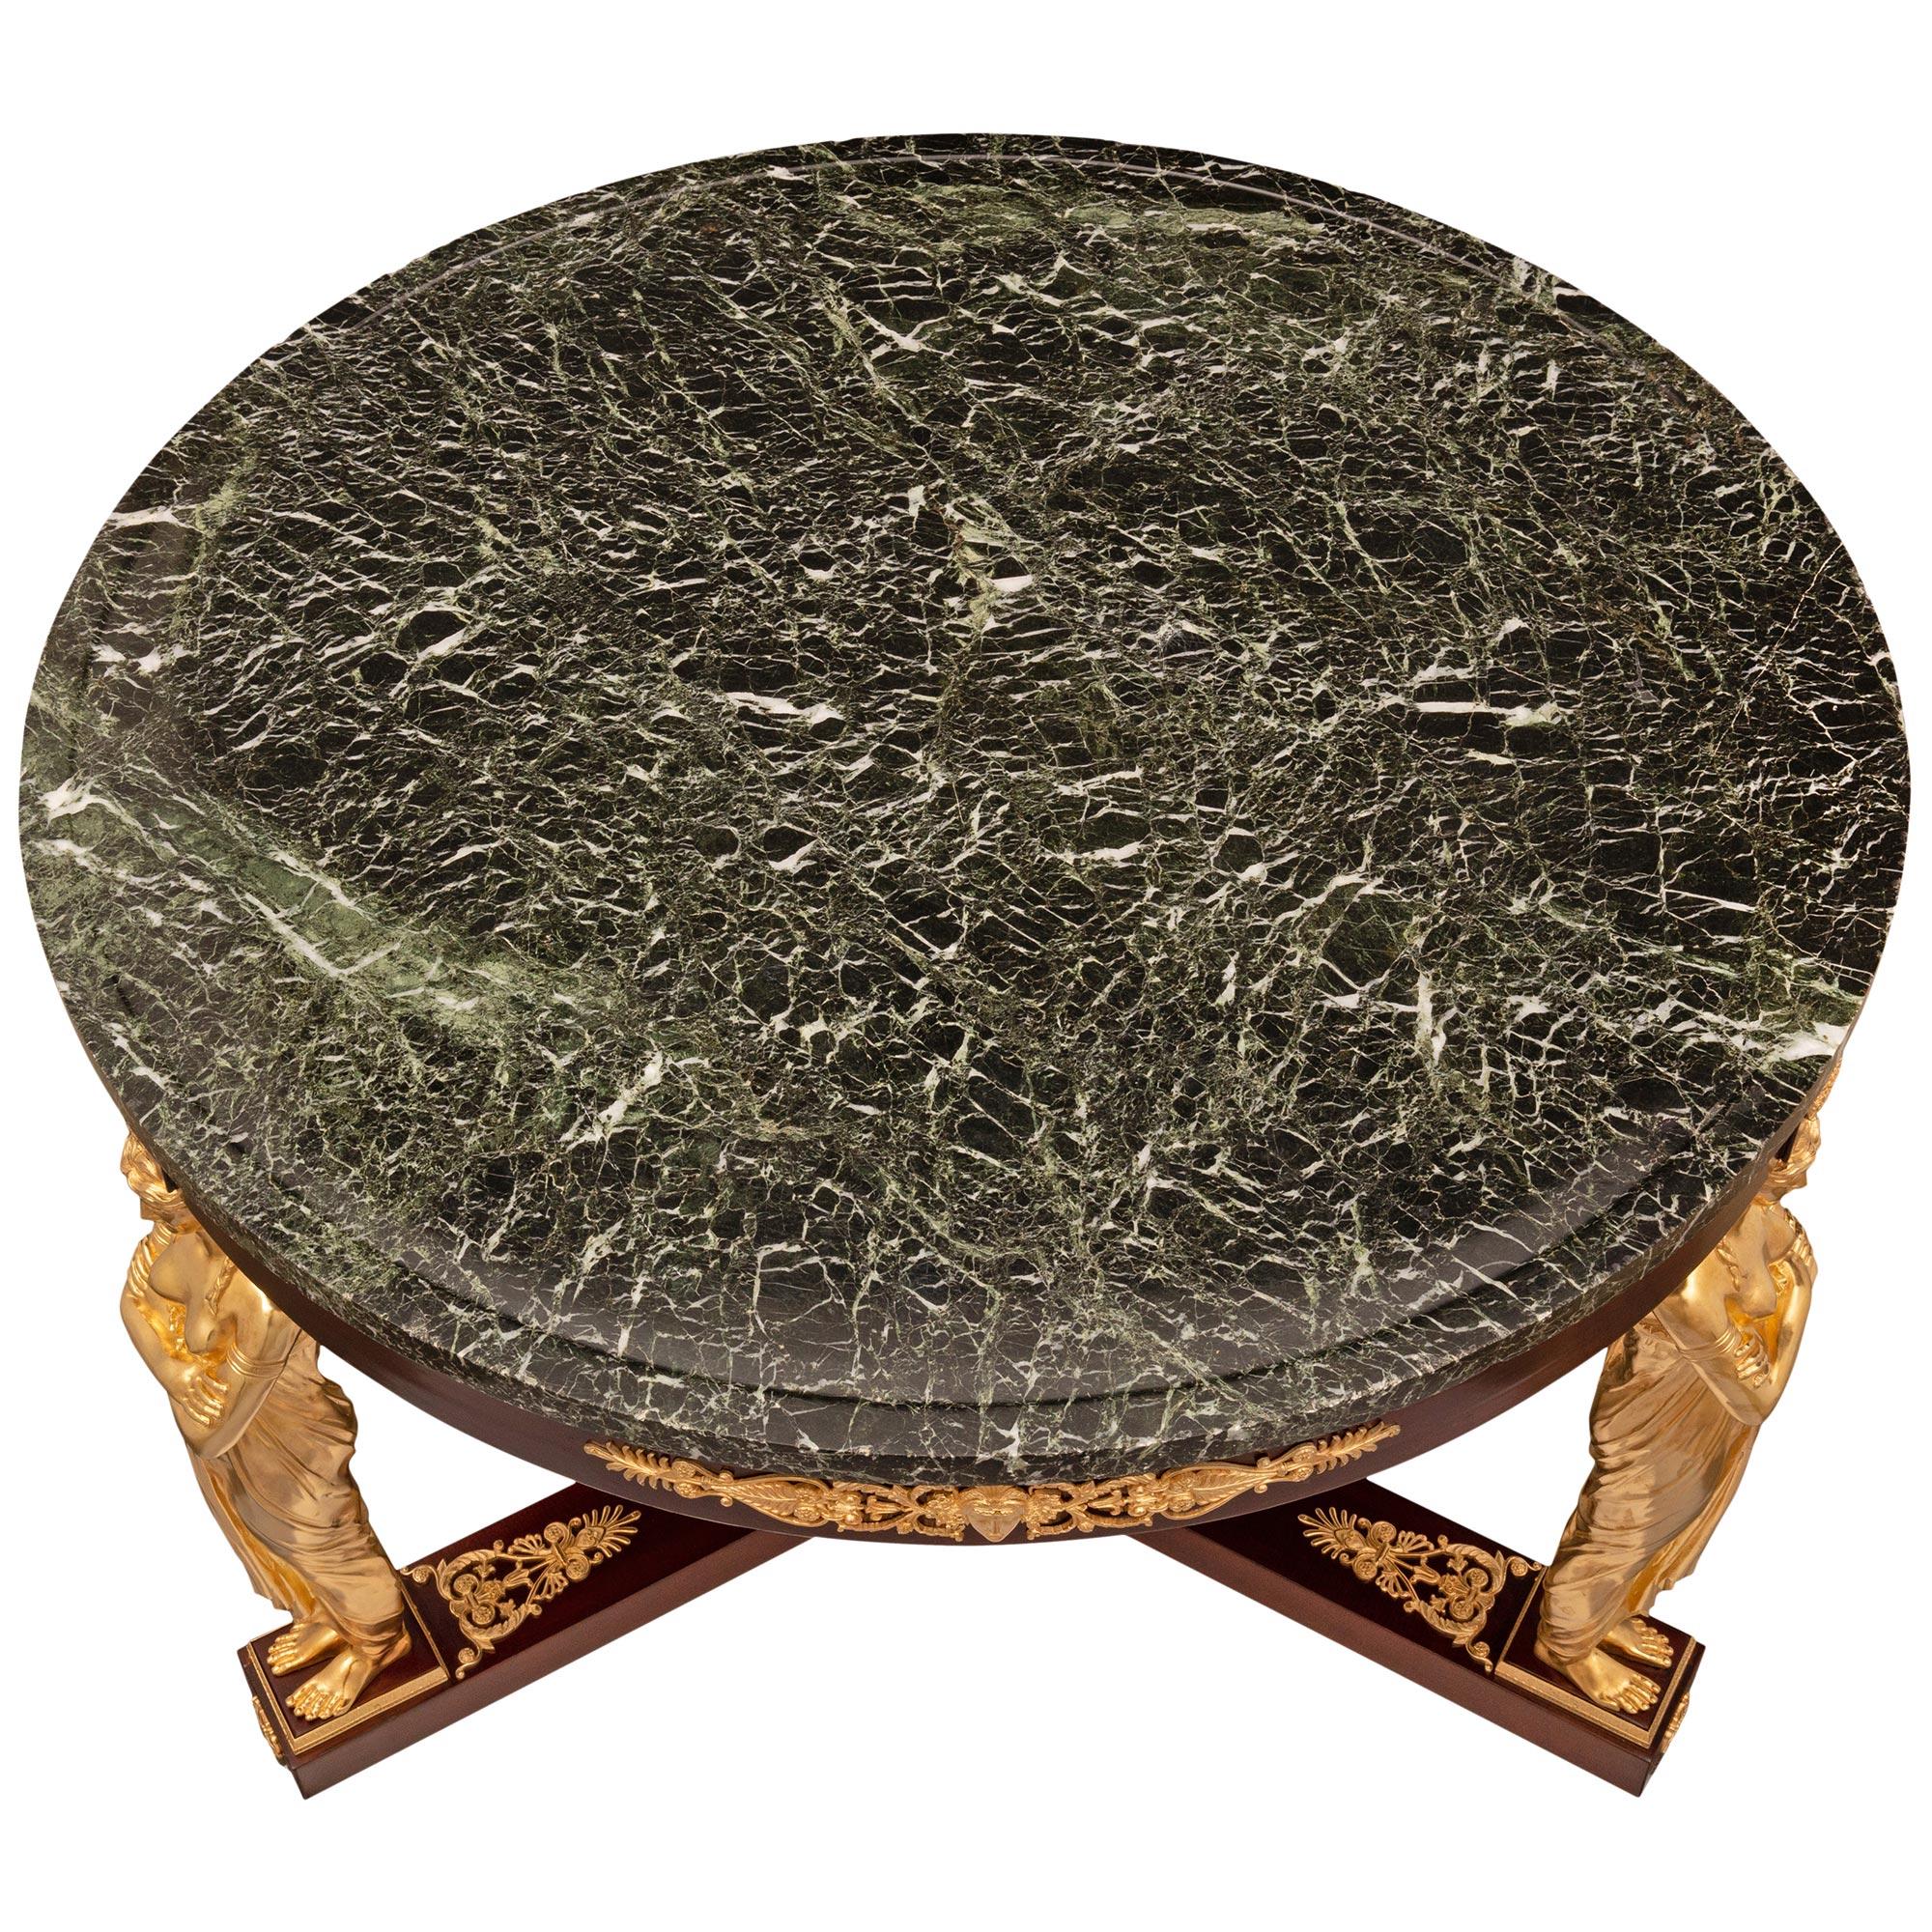 A spectacular French early 19th century Empire style mahogany, ormolu and Vert de Patricia marble center table. The most impressive circular center table is raised by three stunning ormolu supports of beautiful crossed arm maidens dressed in